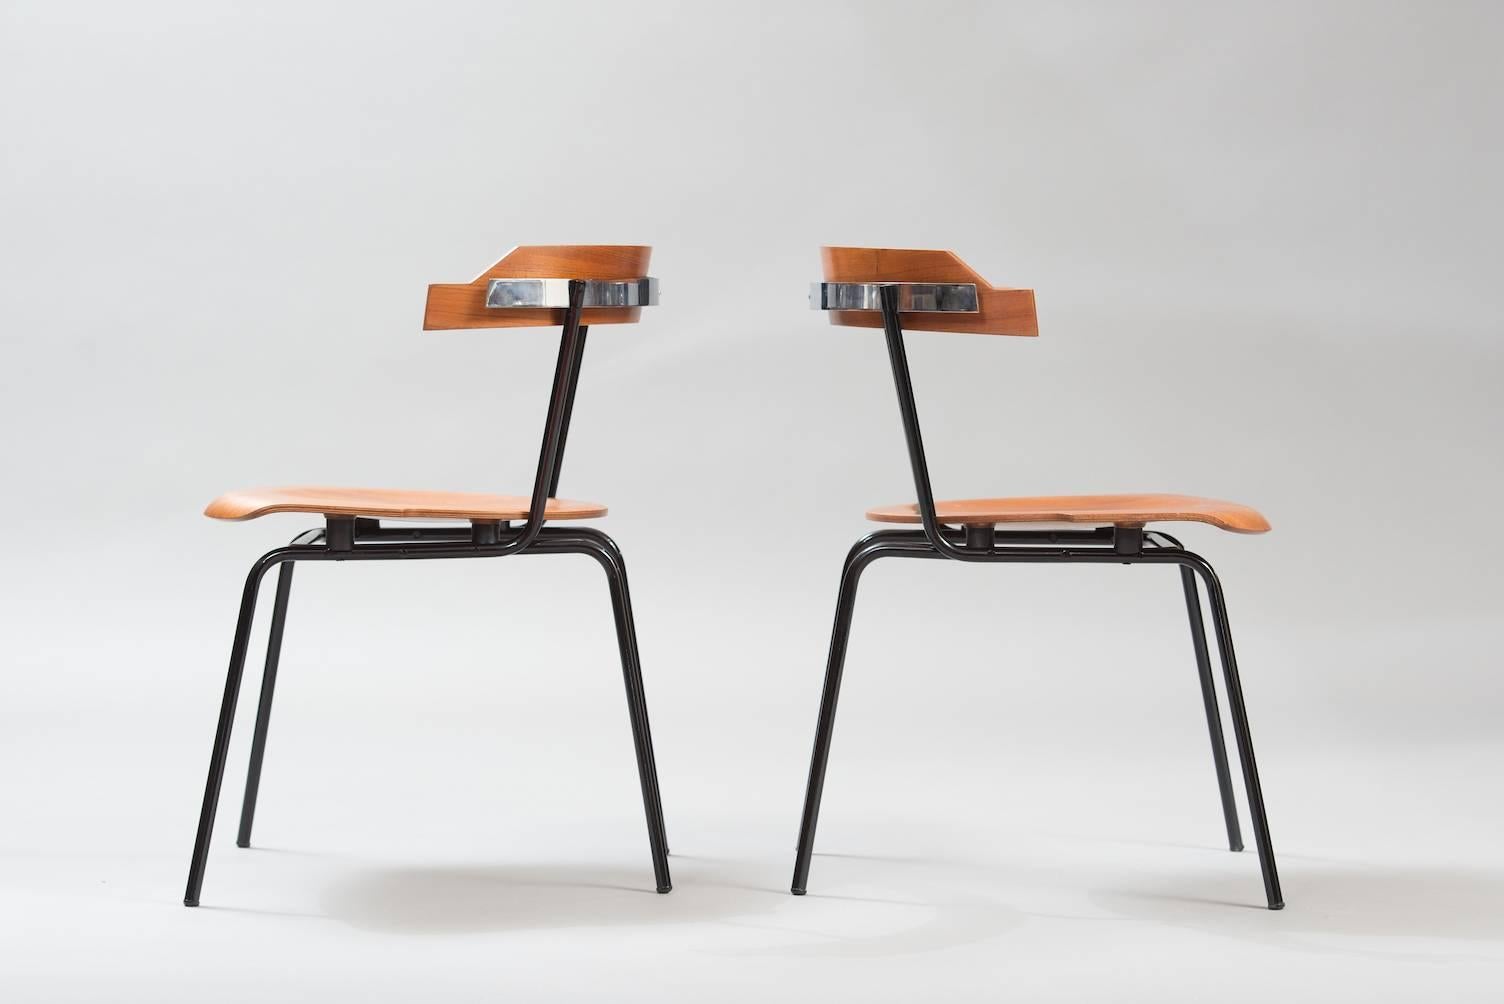 Set of four molded plywood with teak veneer dining chairs, black painted metal structure and a chrome frame in the back.